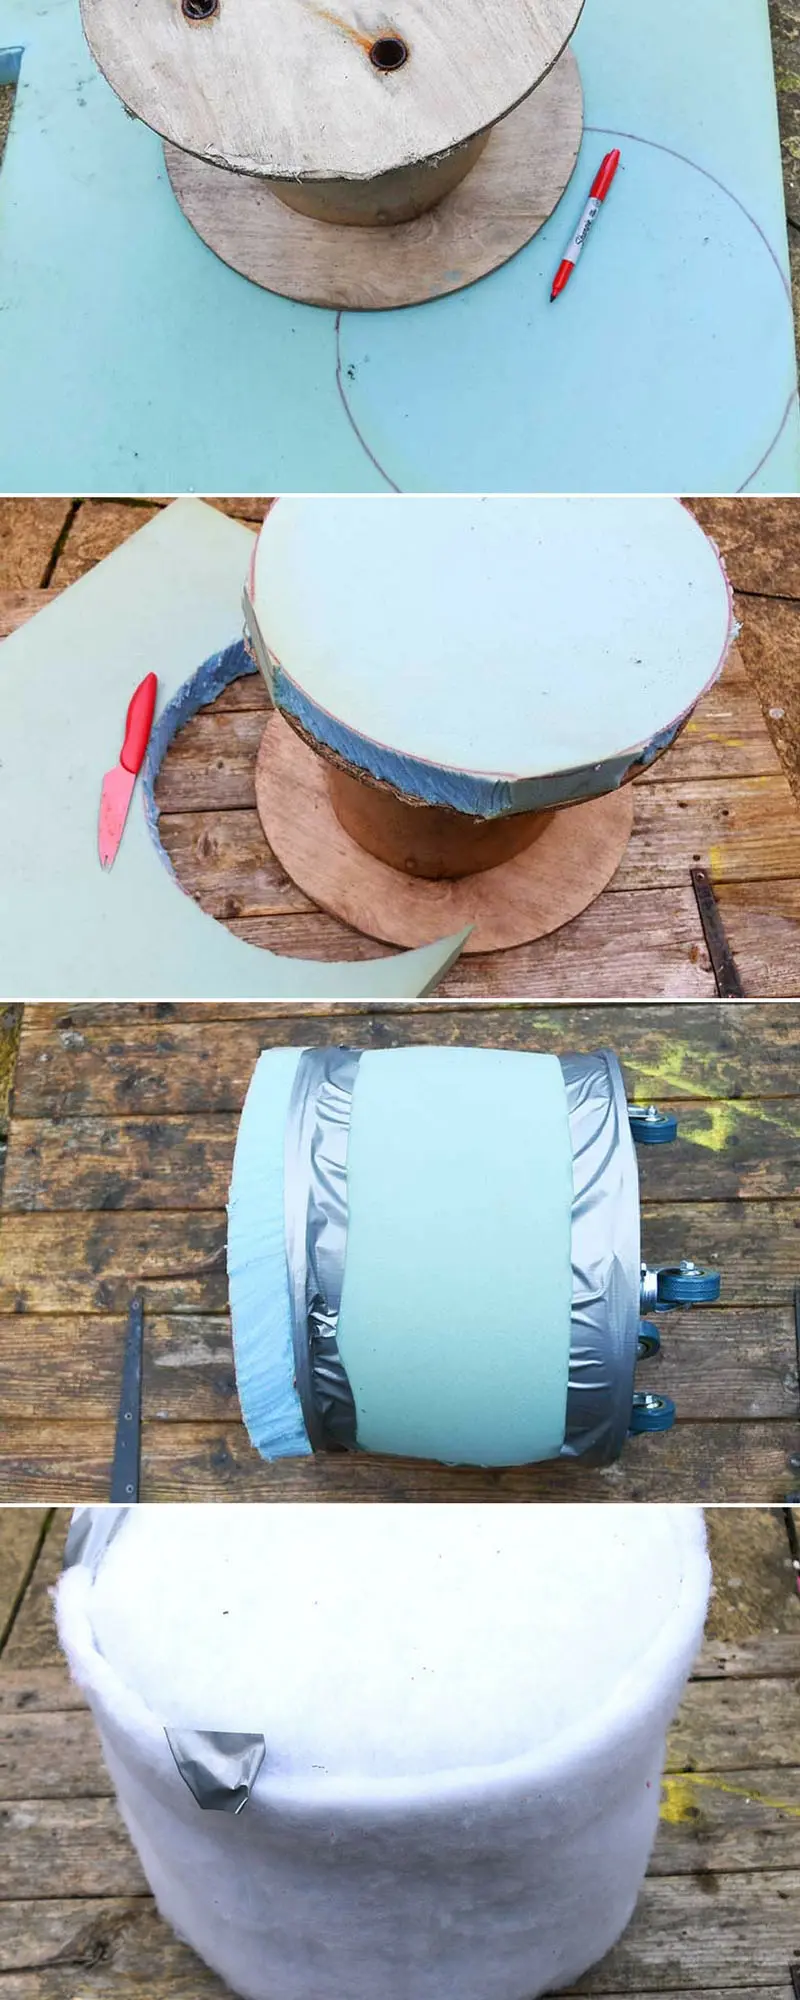 Covering cable spool with upholstery foam.